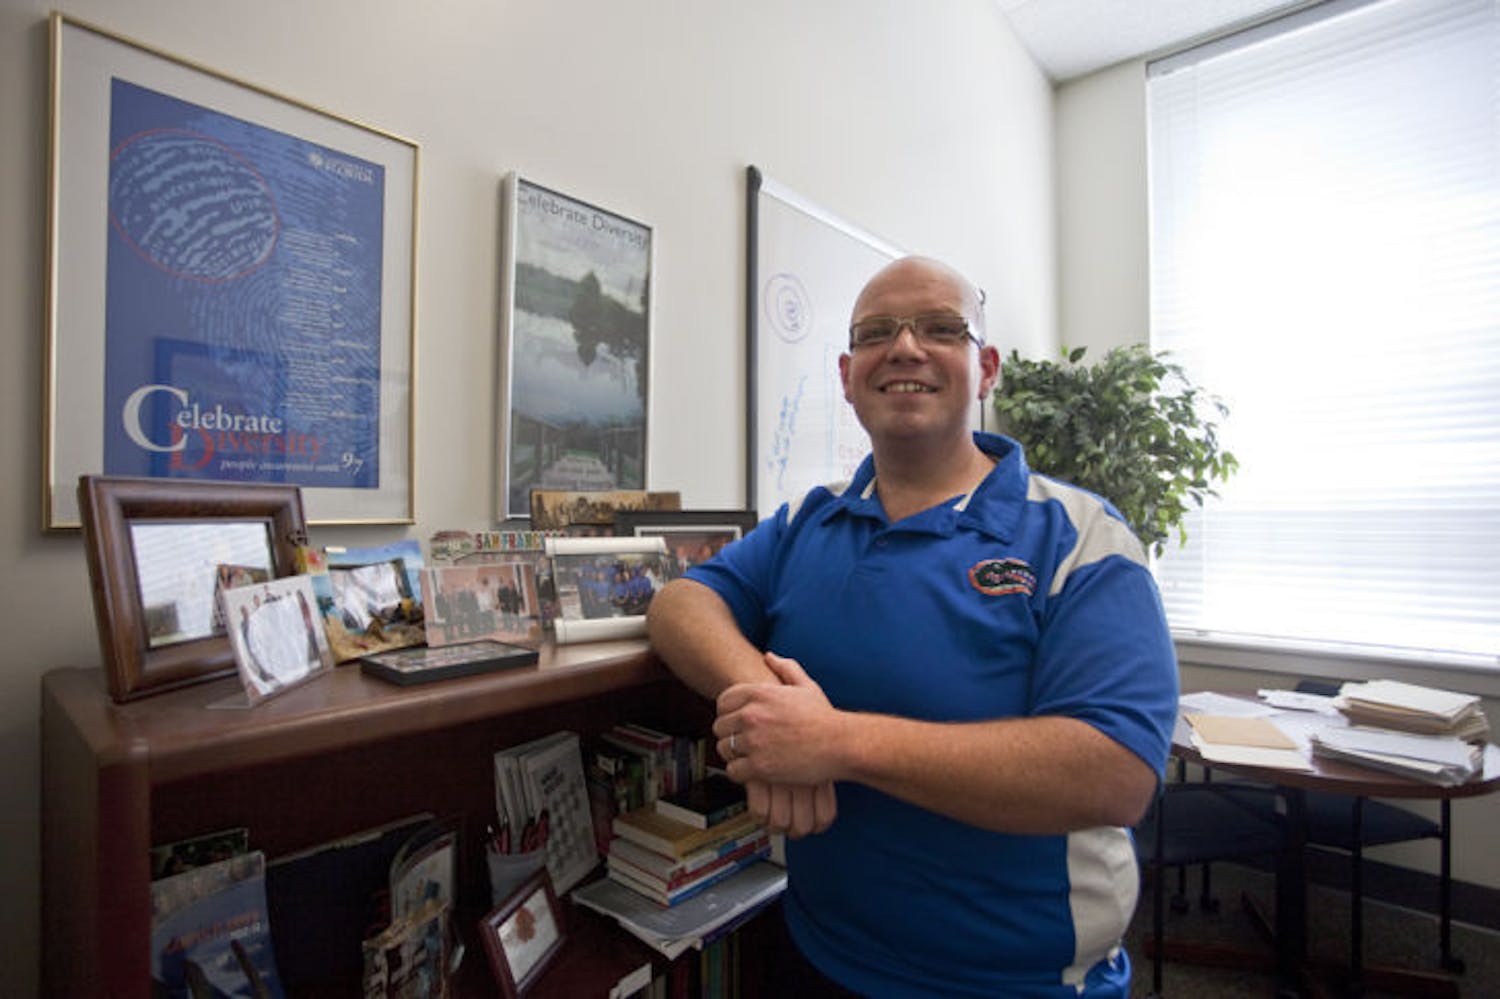 Jarrod Cruz-Stipsits, director of intercultural engagement for UF Multicultural &amp; Diversity Affairs, poses in his current office in Peabody Hall on Wednesday afternoon.
&nbsp;